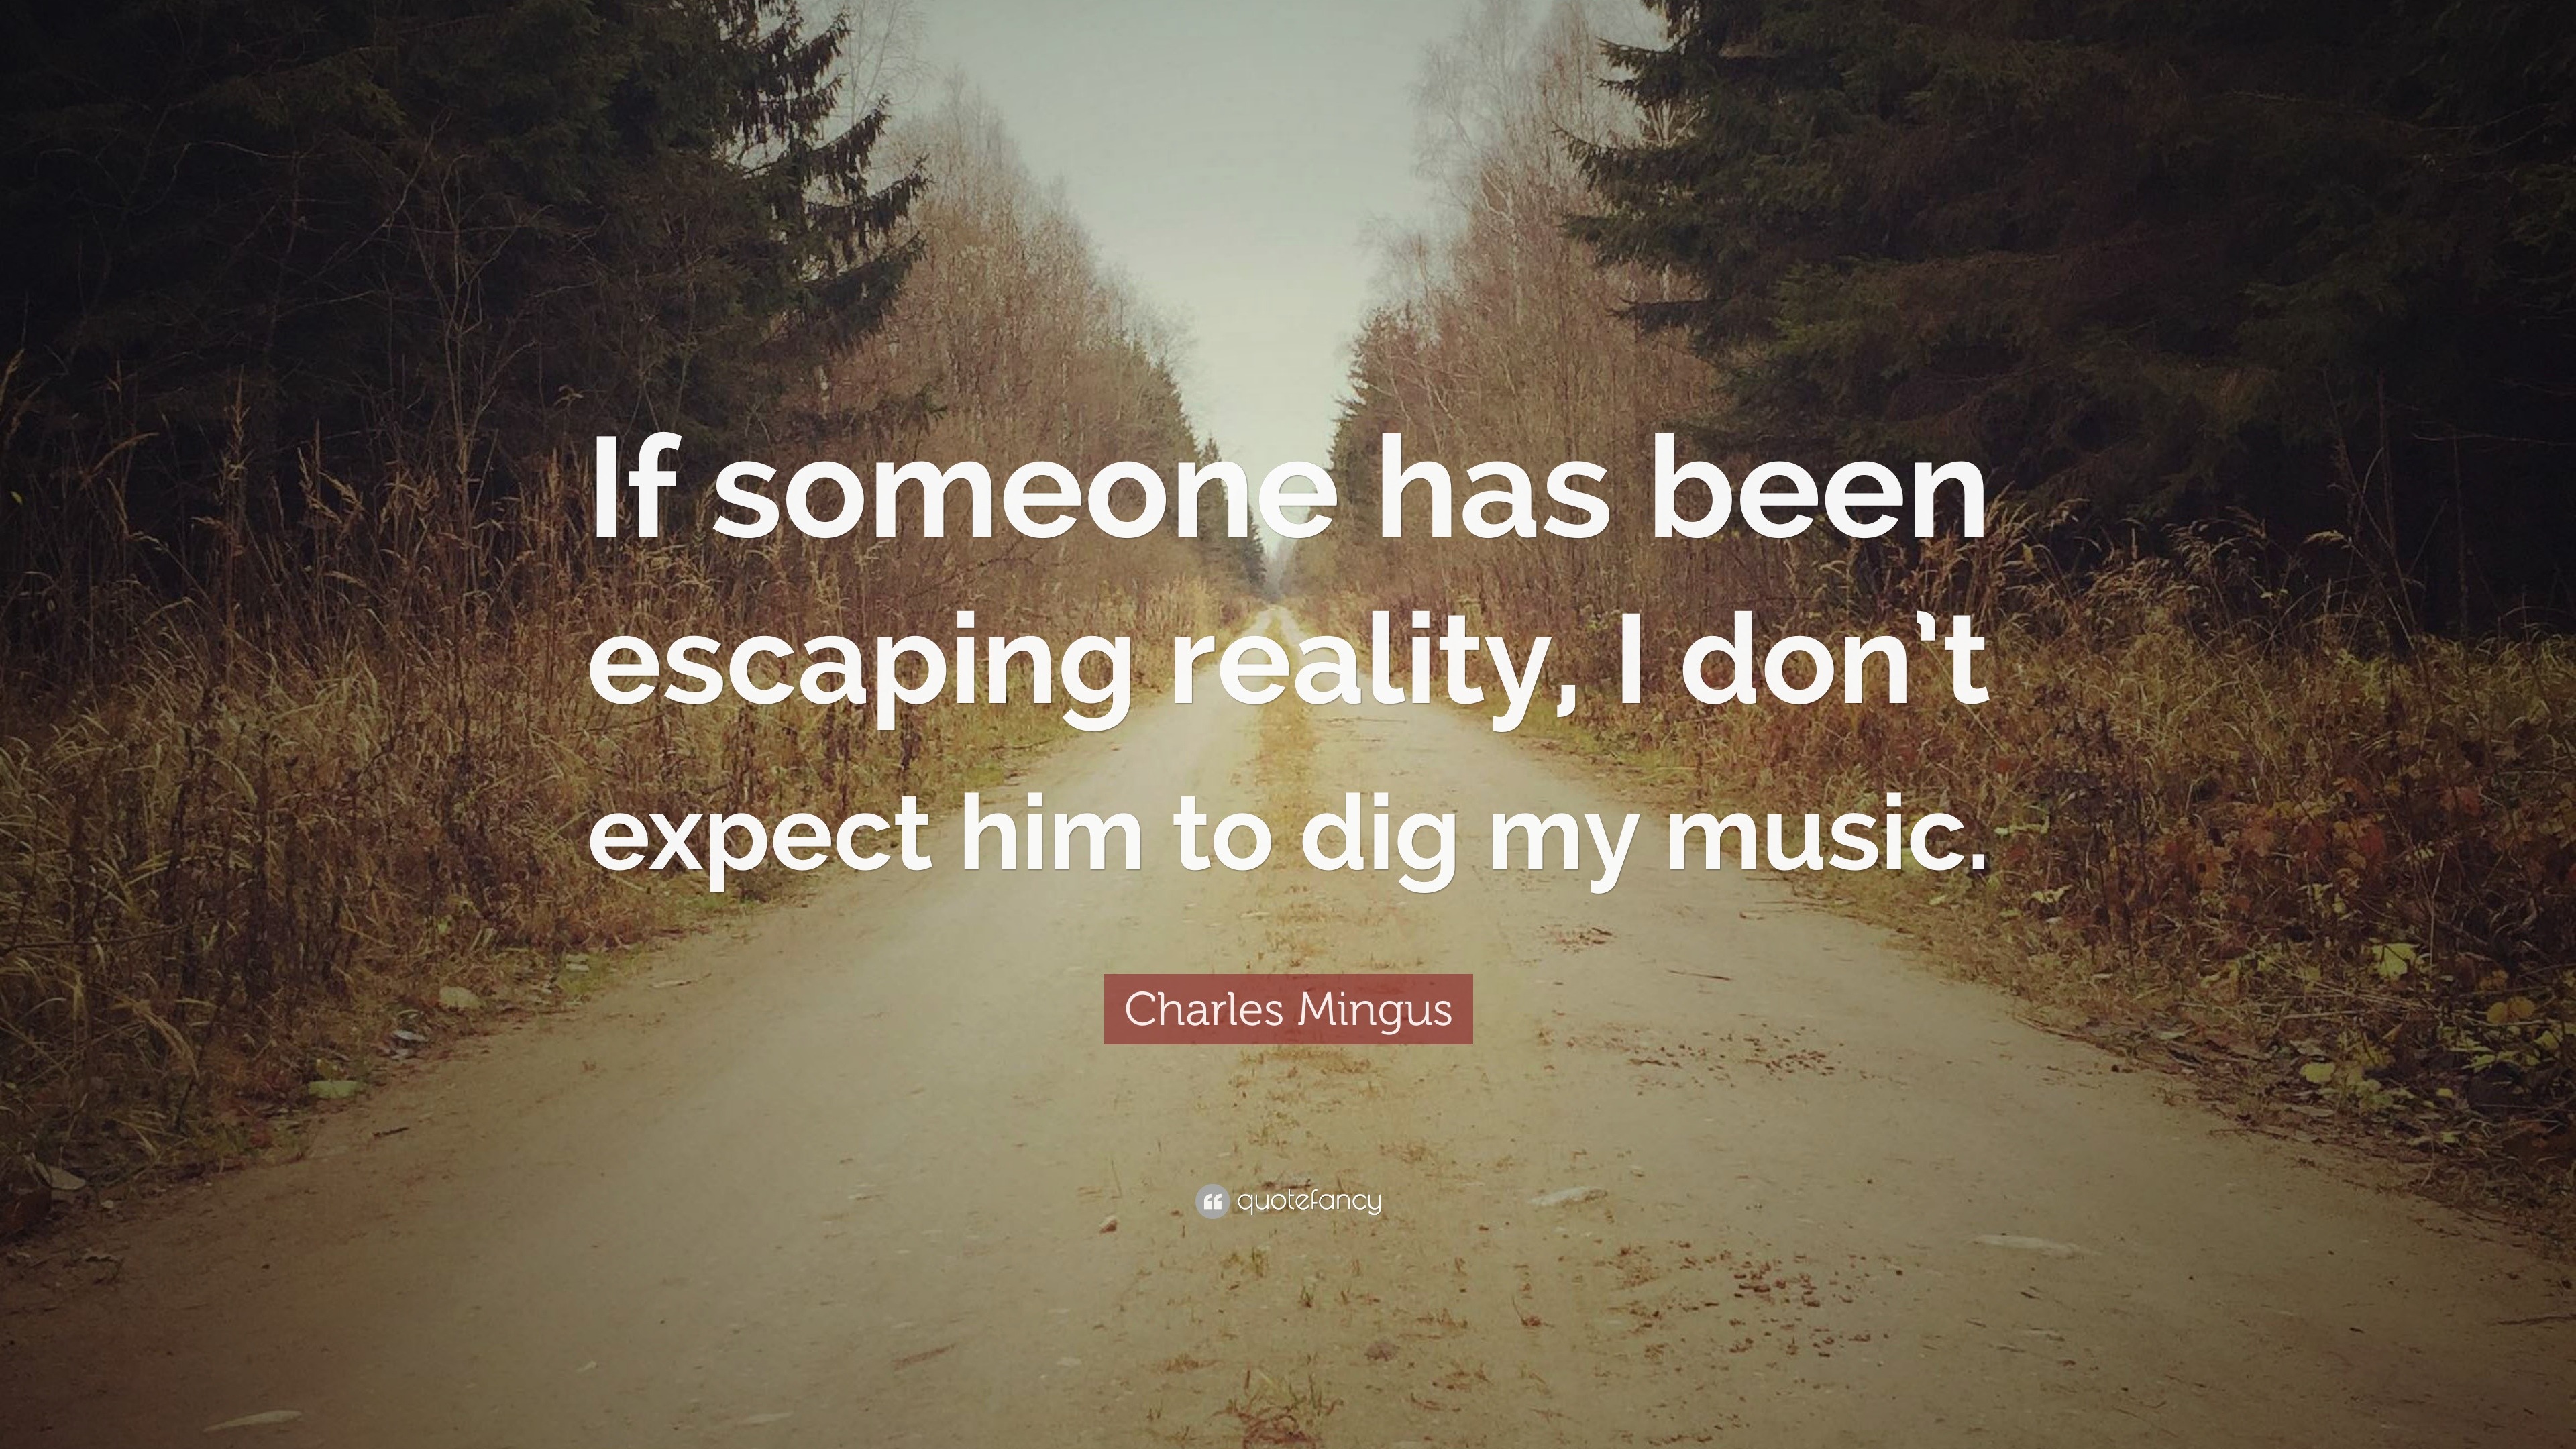 Charles Mingus Quote: “If someone has been escaping reality, I don’t